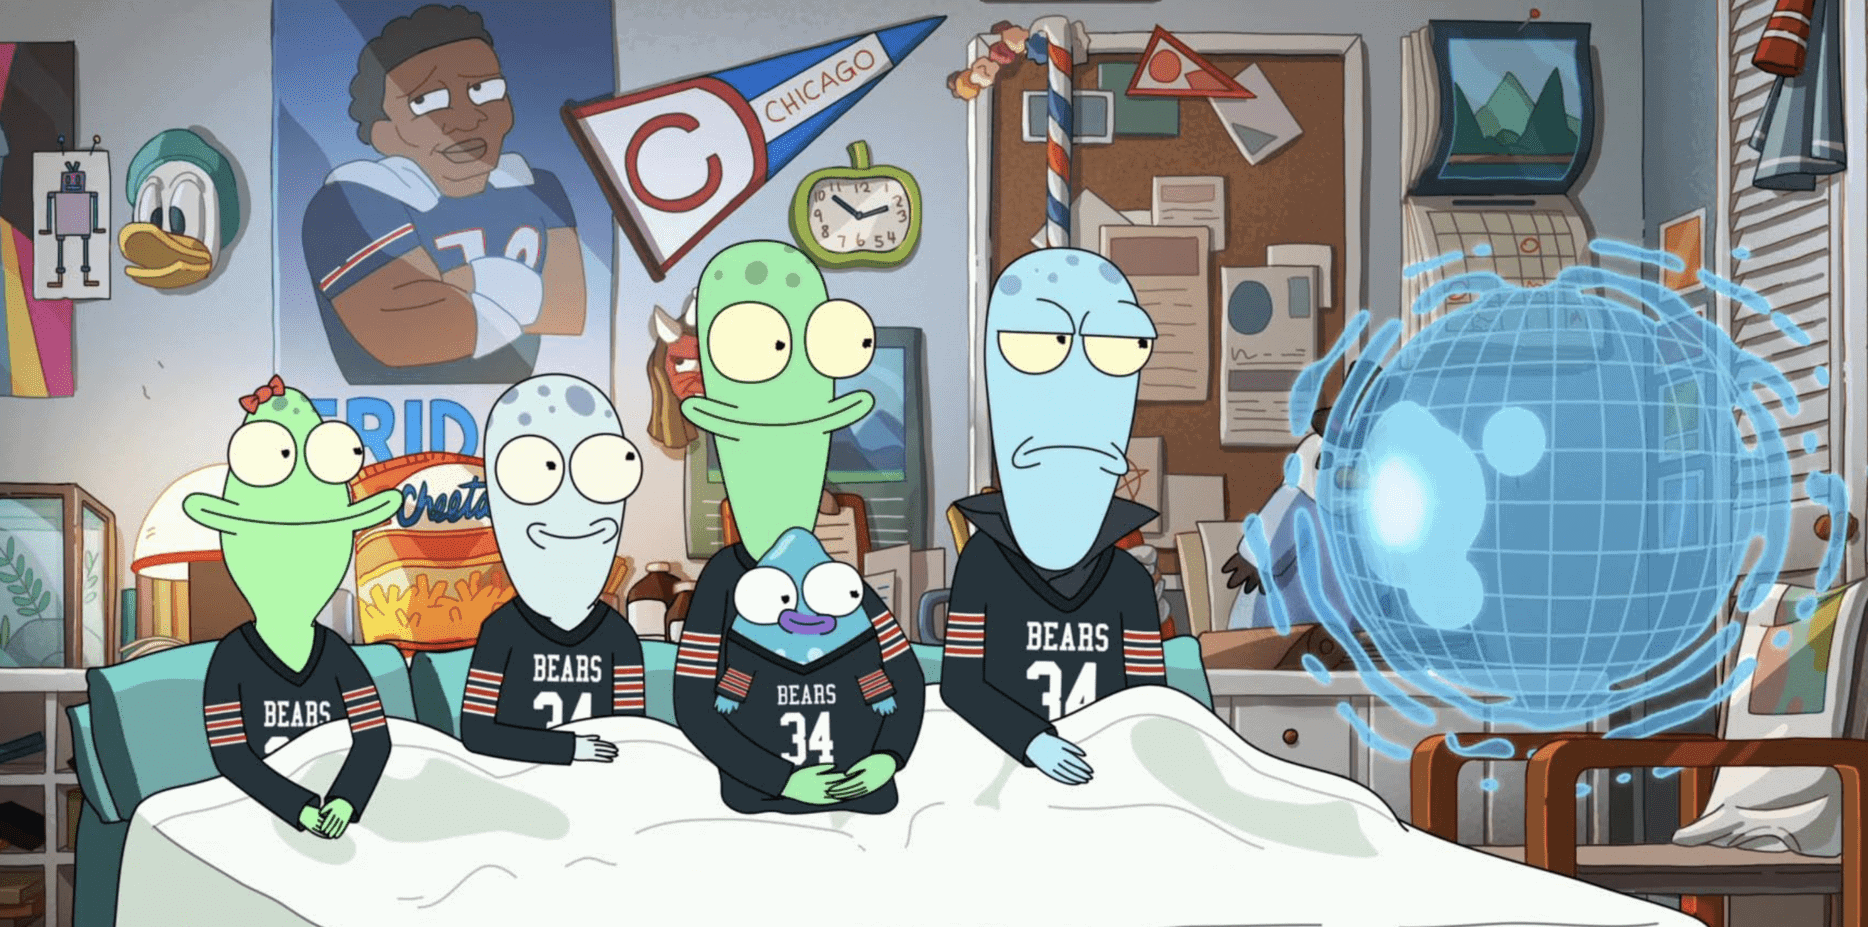 Five aliens sit in a bed wearing Chicago Bears jerseys and listening to a story from an artificial intelligence orb in this image from Important Science.